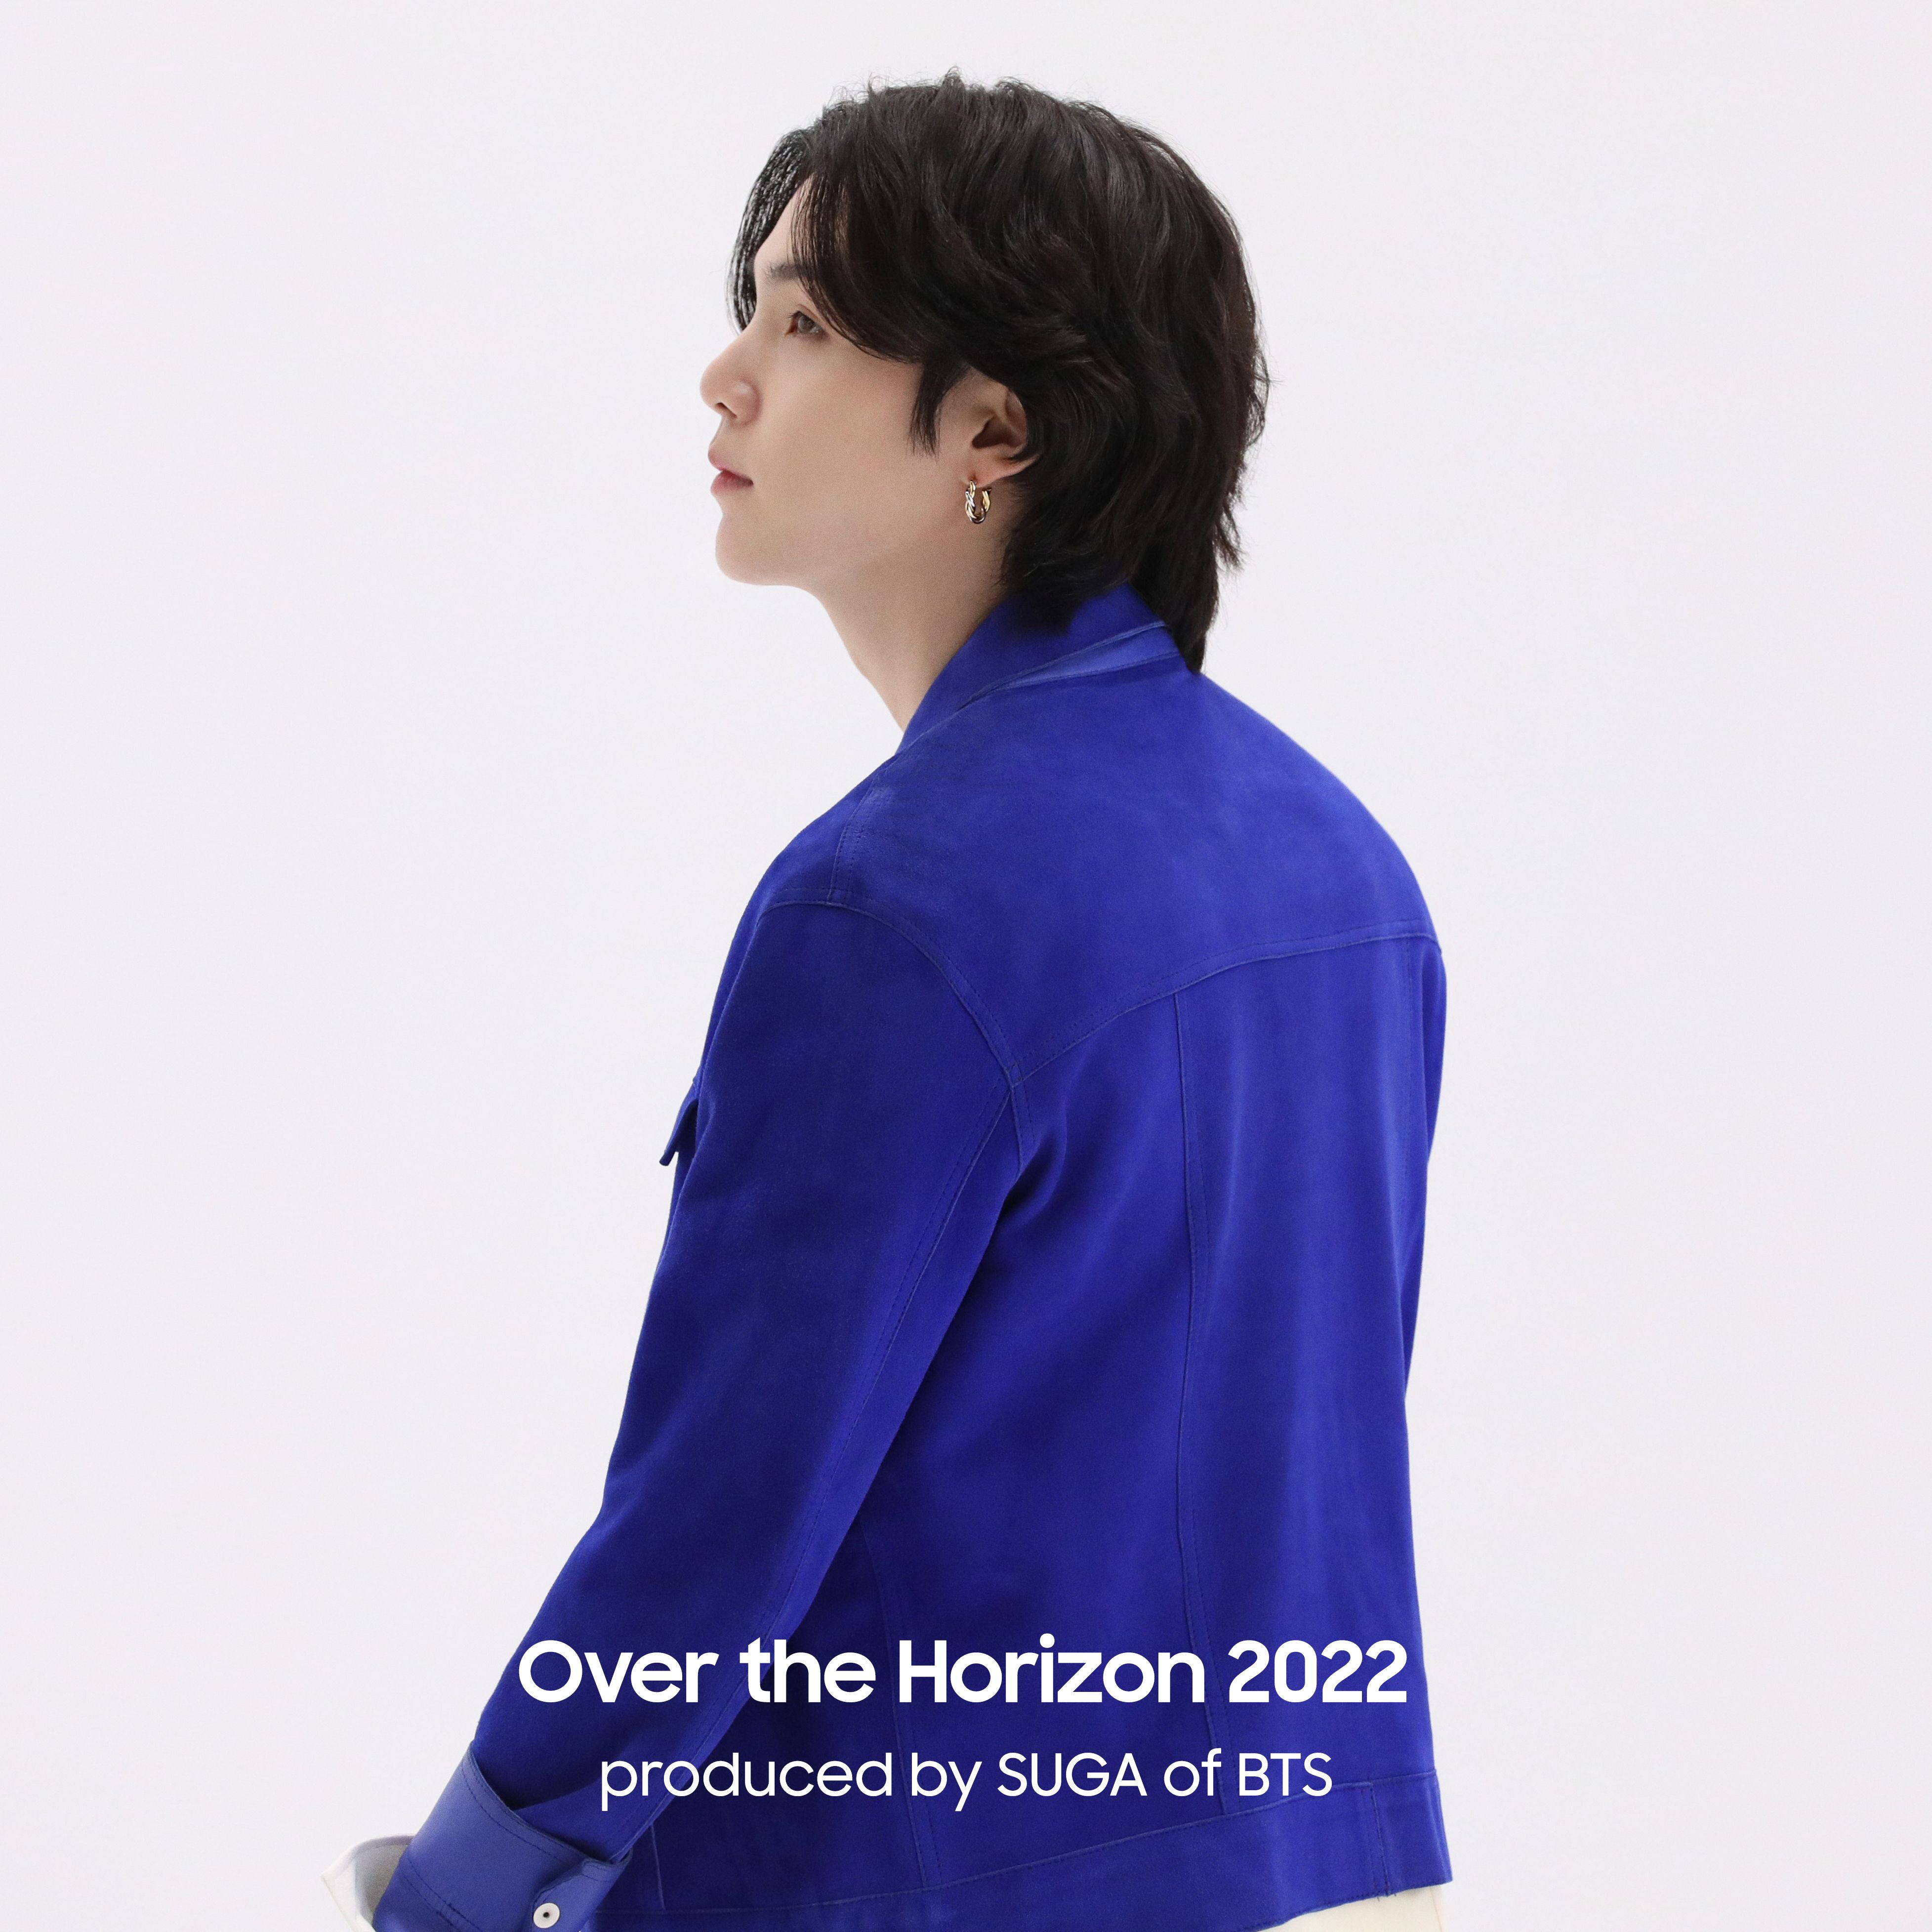 Download Over the Horizon 2022 by SUGA of BTS